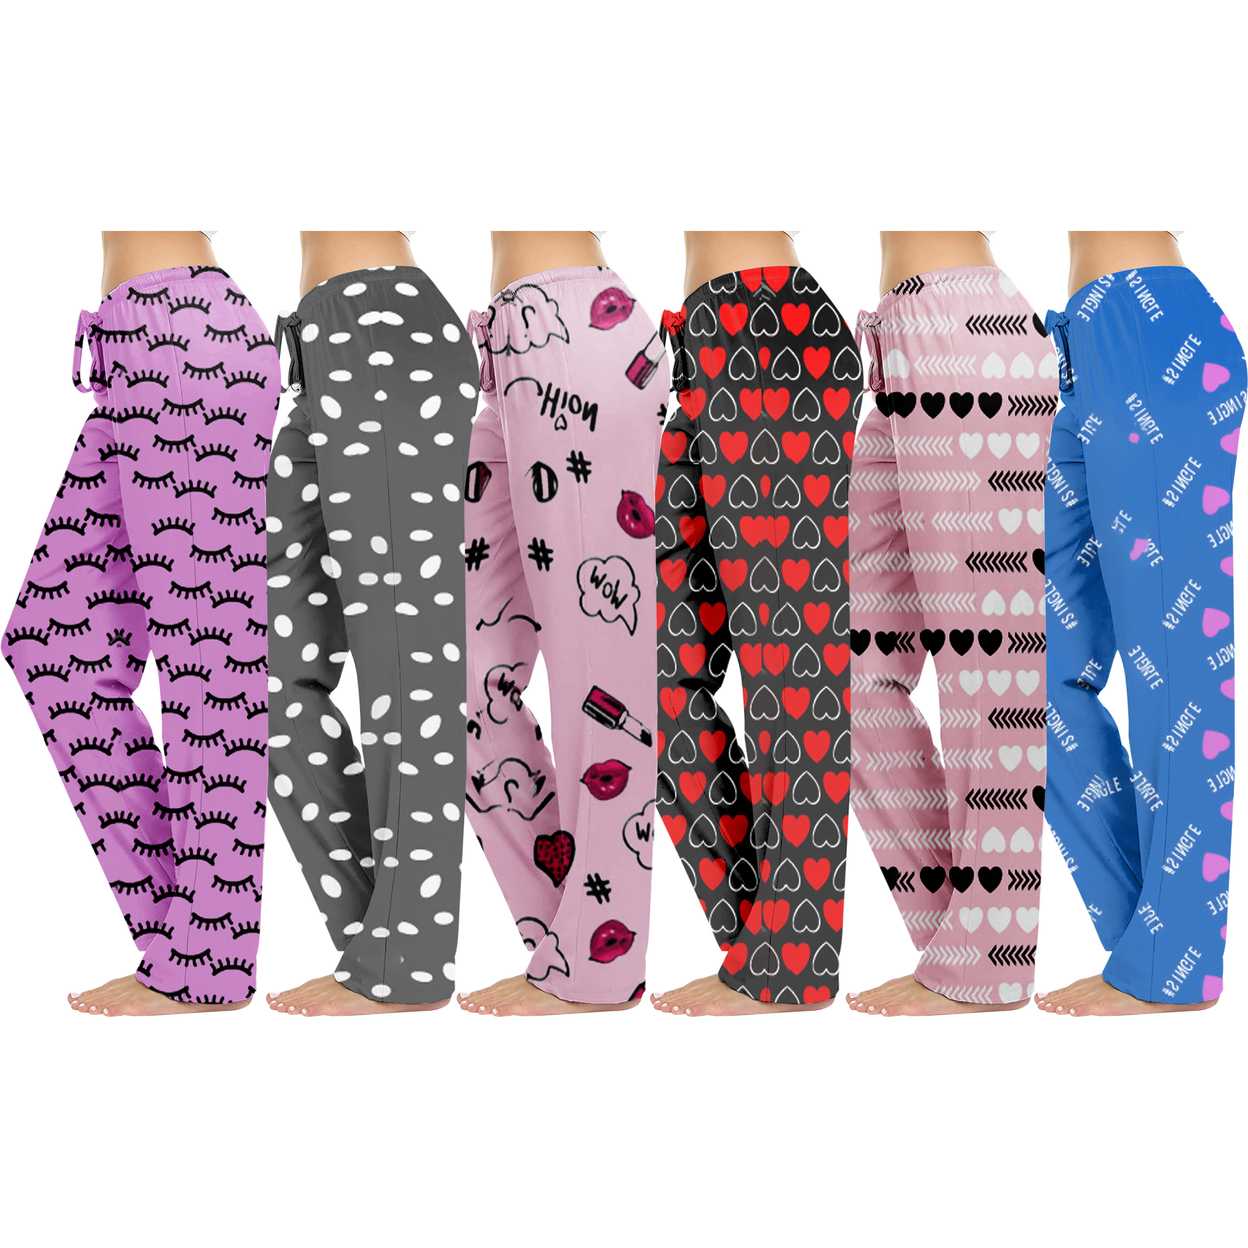 4-Pack: Women's Casual Fun Printed Lightweight Lounge Terry Knit Pajama Bottom Pants - Large, Shapes